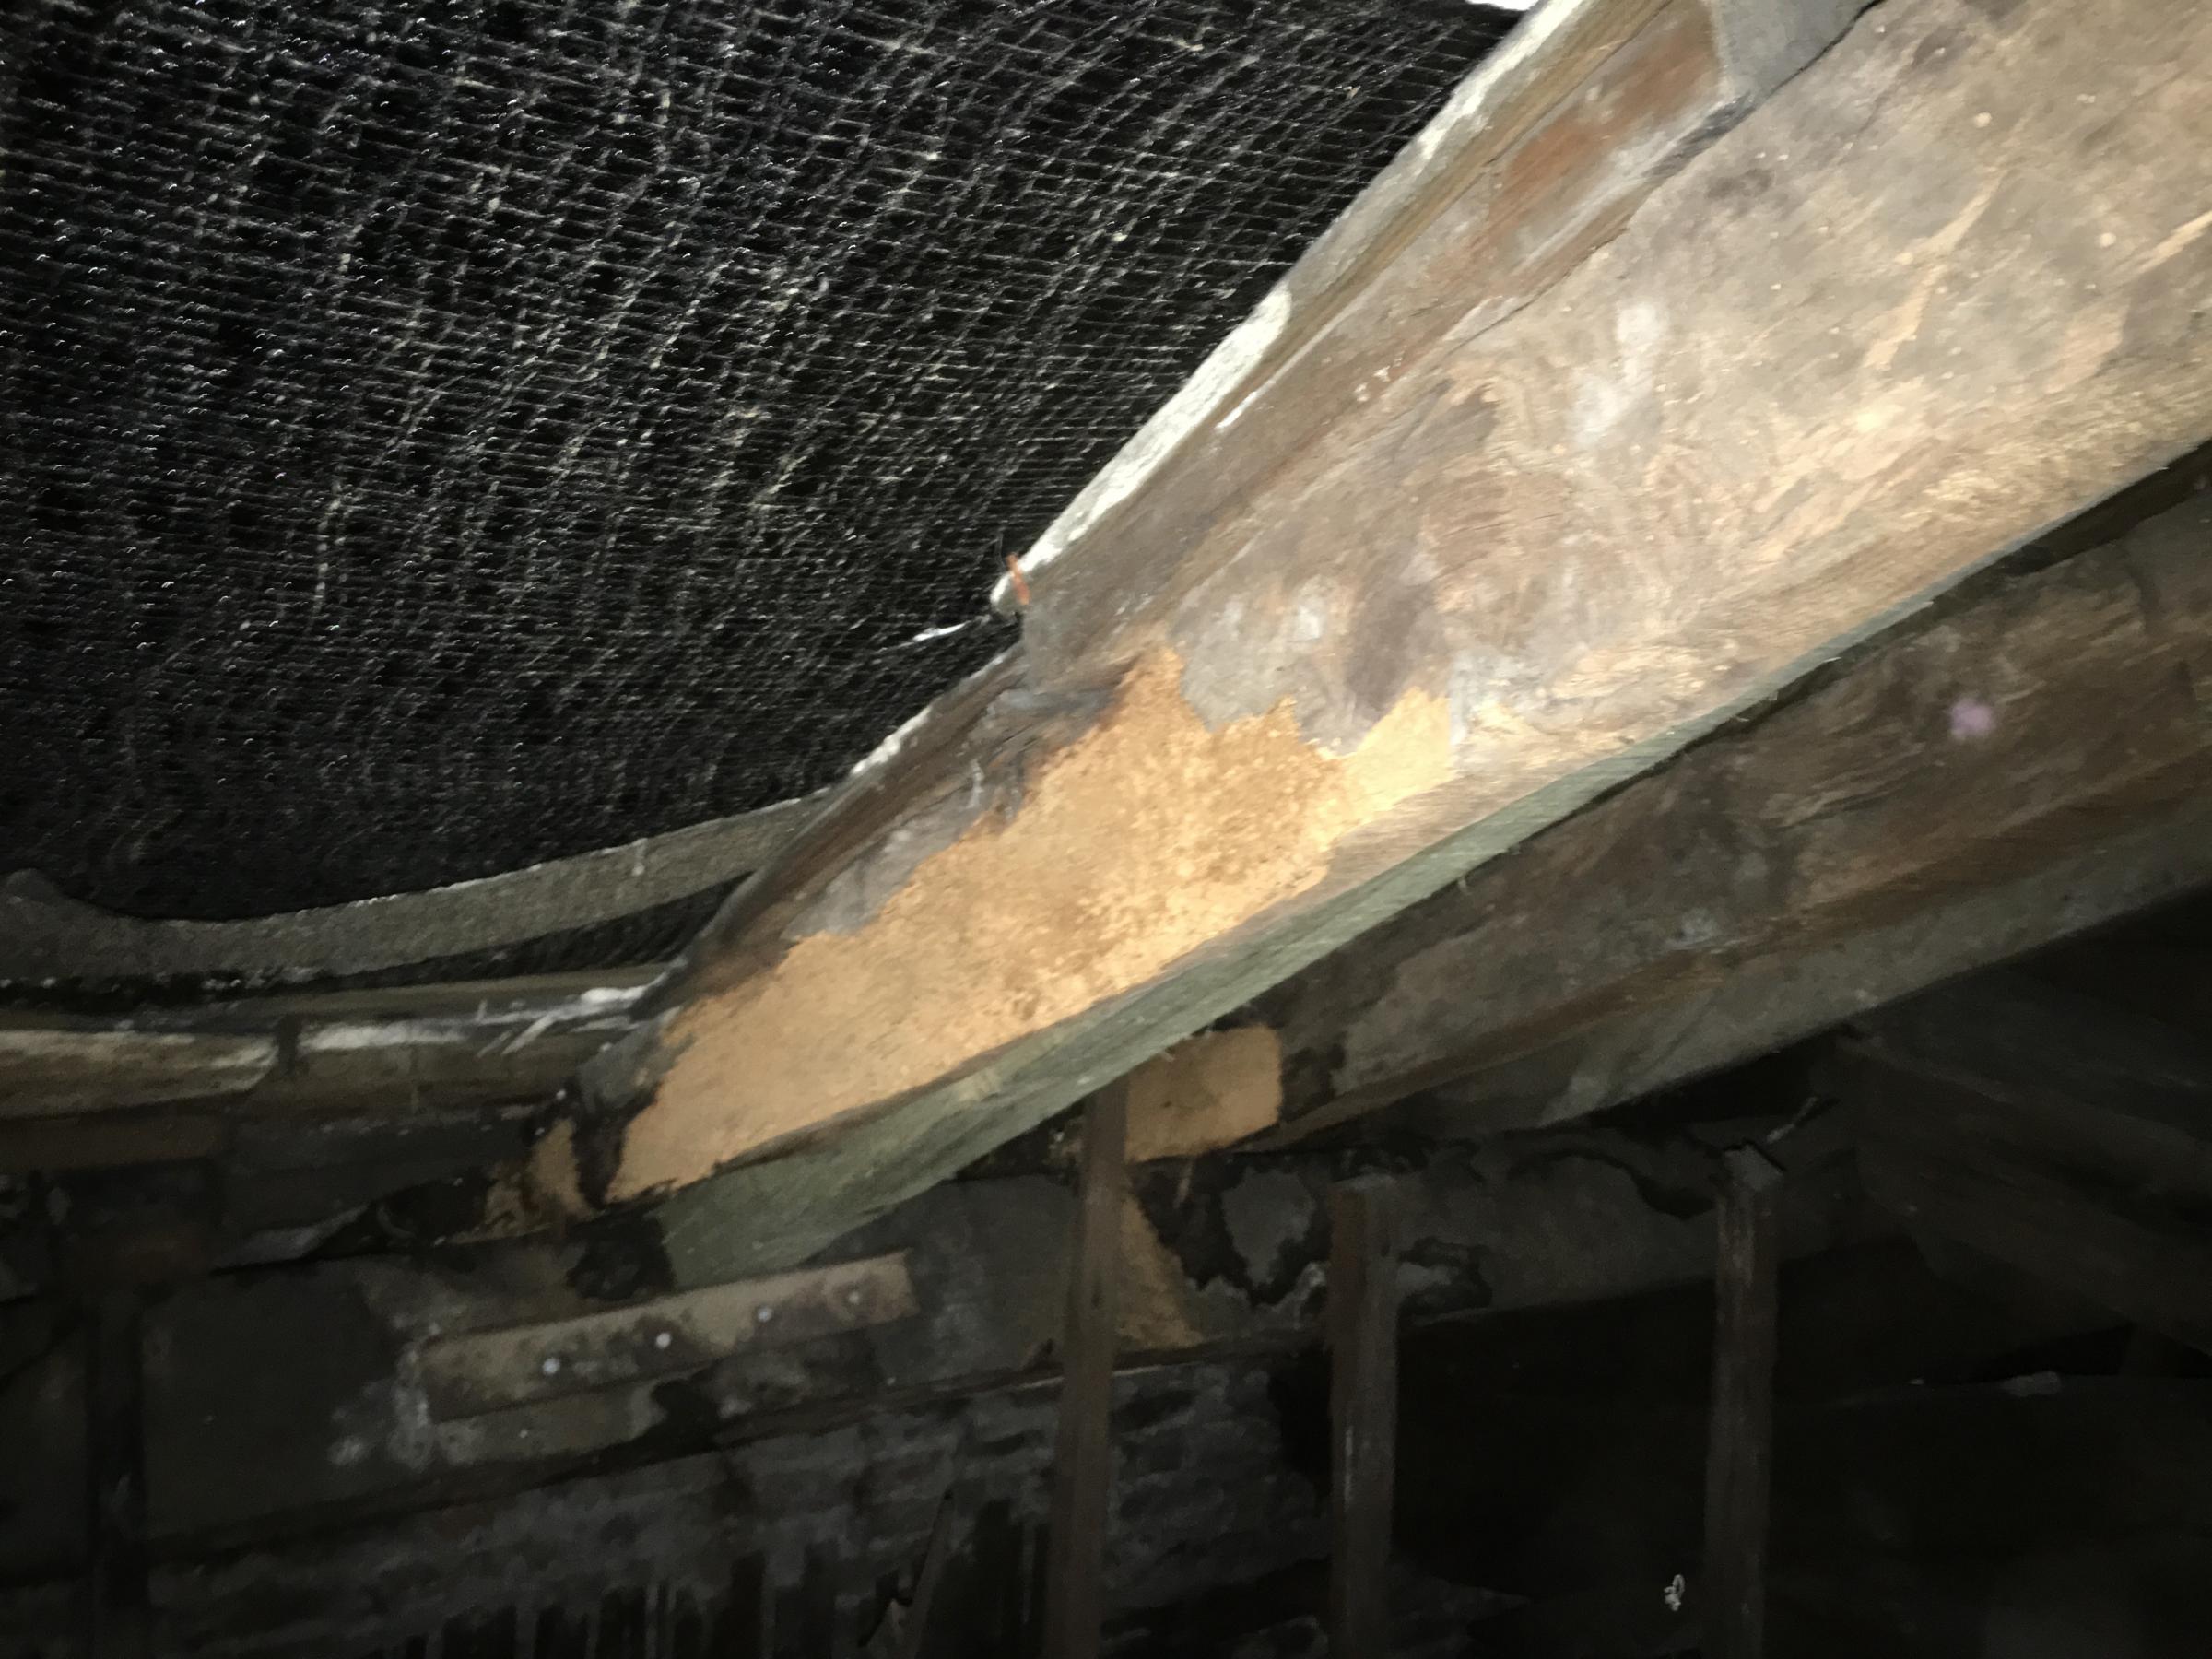 Over £100,000 worth of damage was caused to Bedale Hall roof by lead thieves